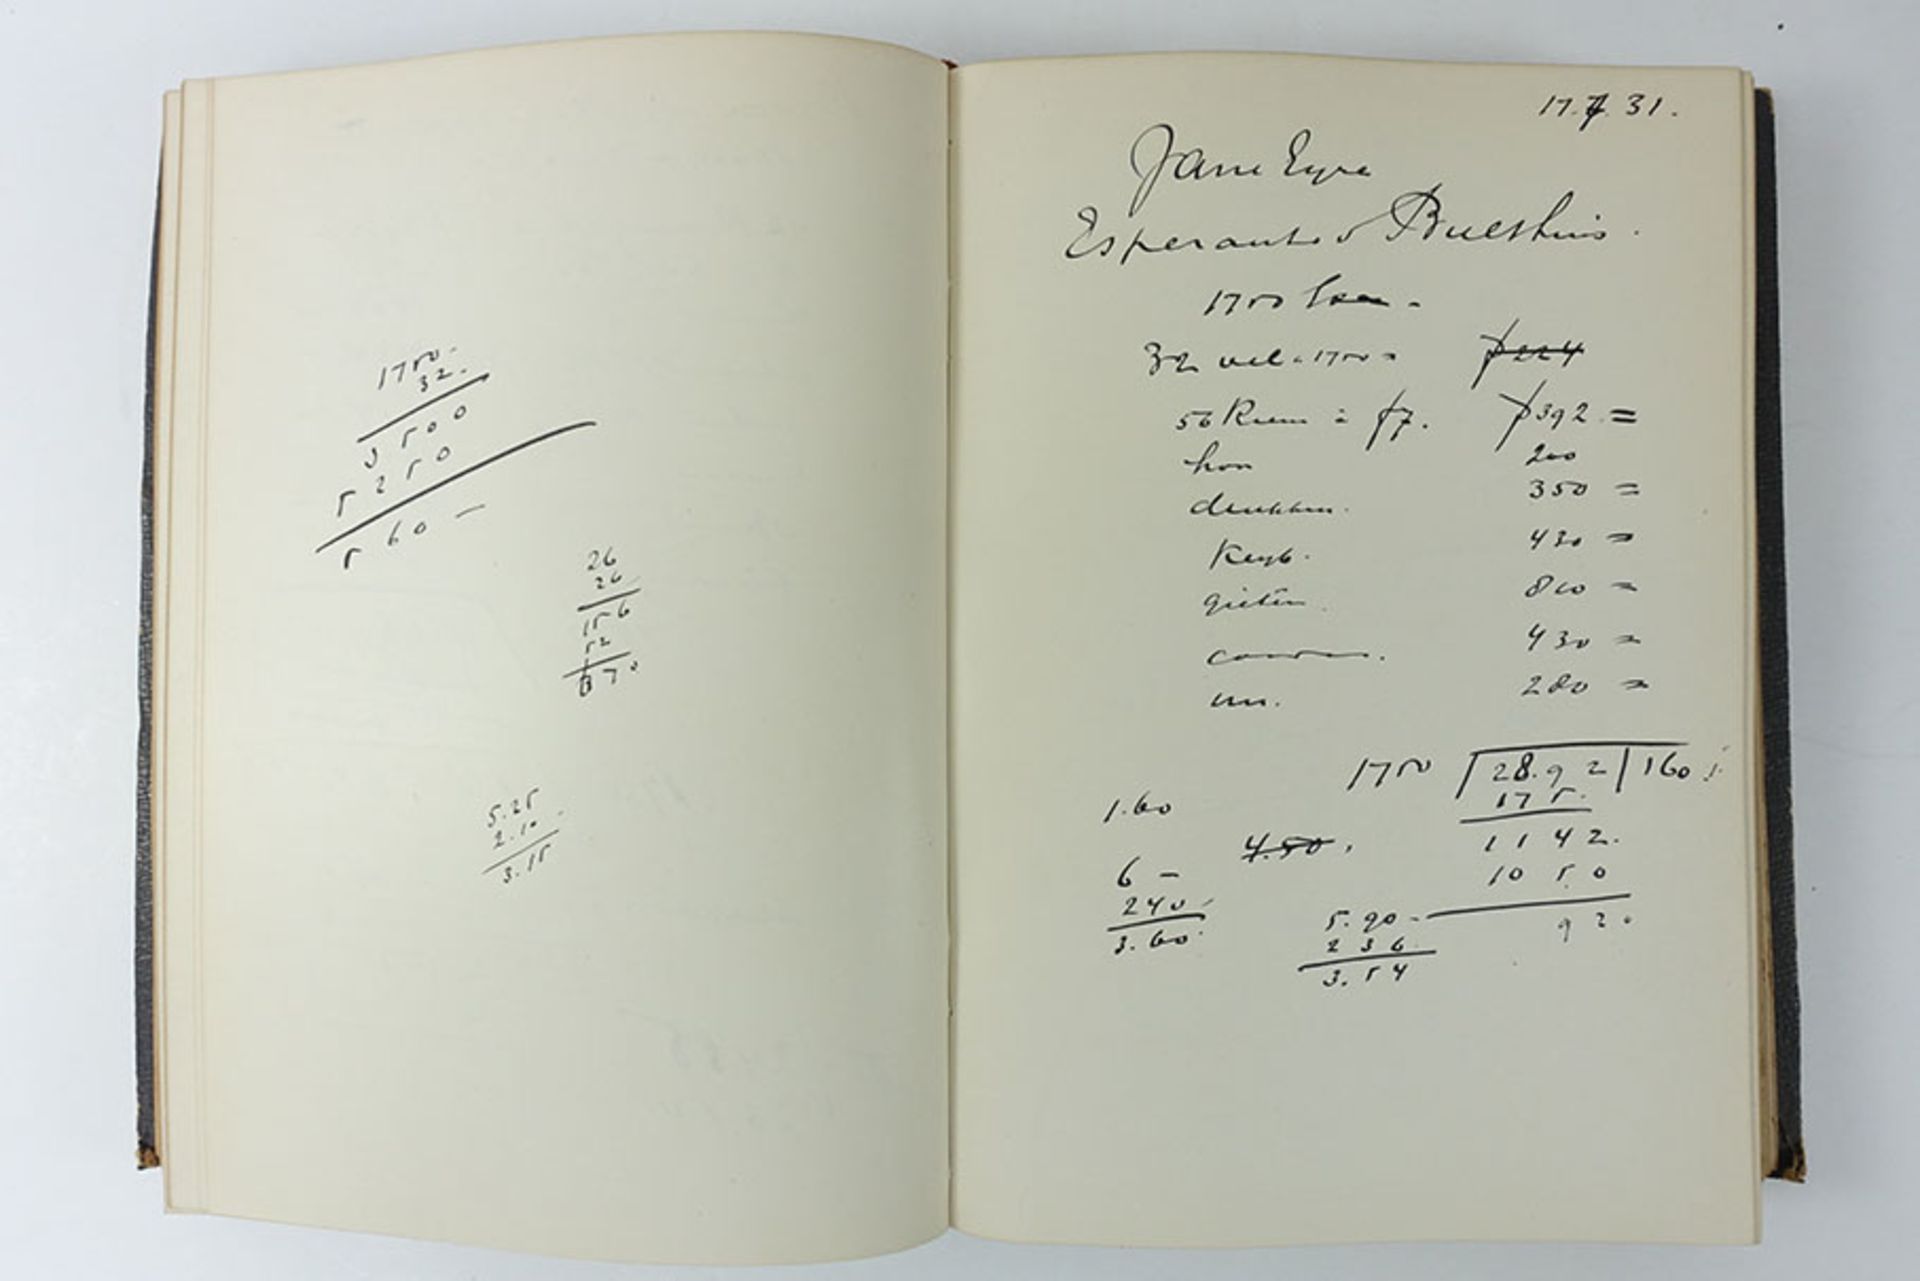 THIEME -- BINDER containing 'calculations' for book publications in the years 1926 up to 1934 by